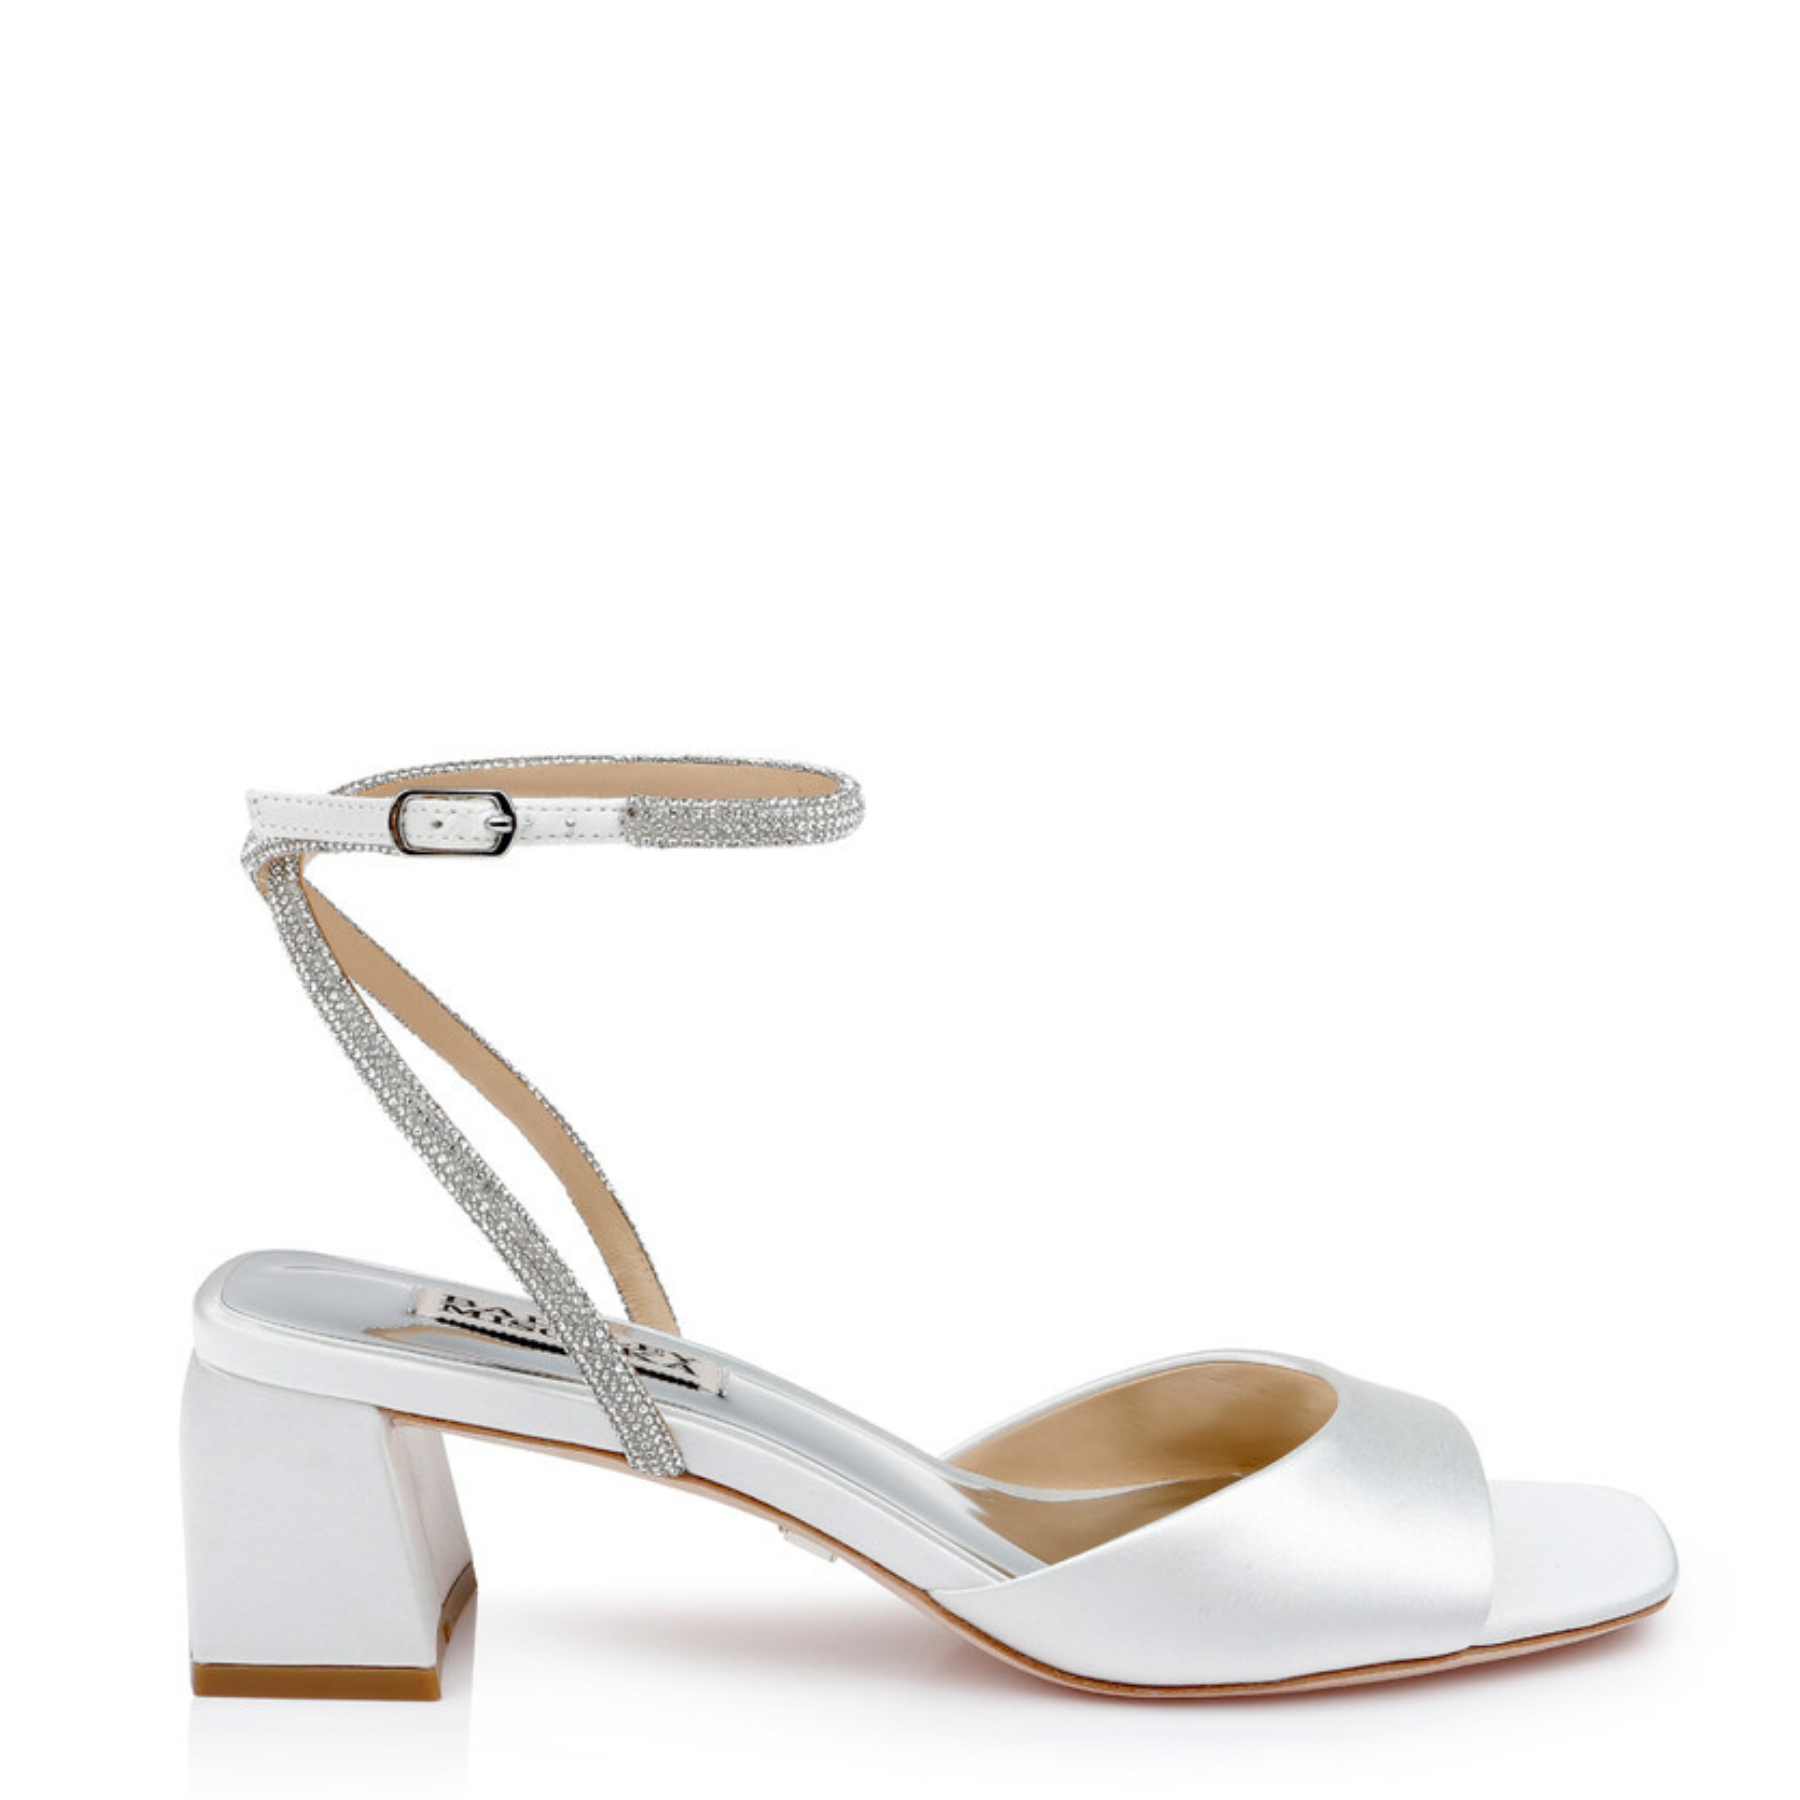 STORMI LOW HEEL SANDALS WITH BUCKLE ANKLE STRAP IN ROSE GOLD GLITTER –  Where's That From UK